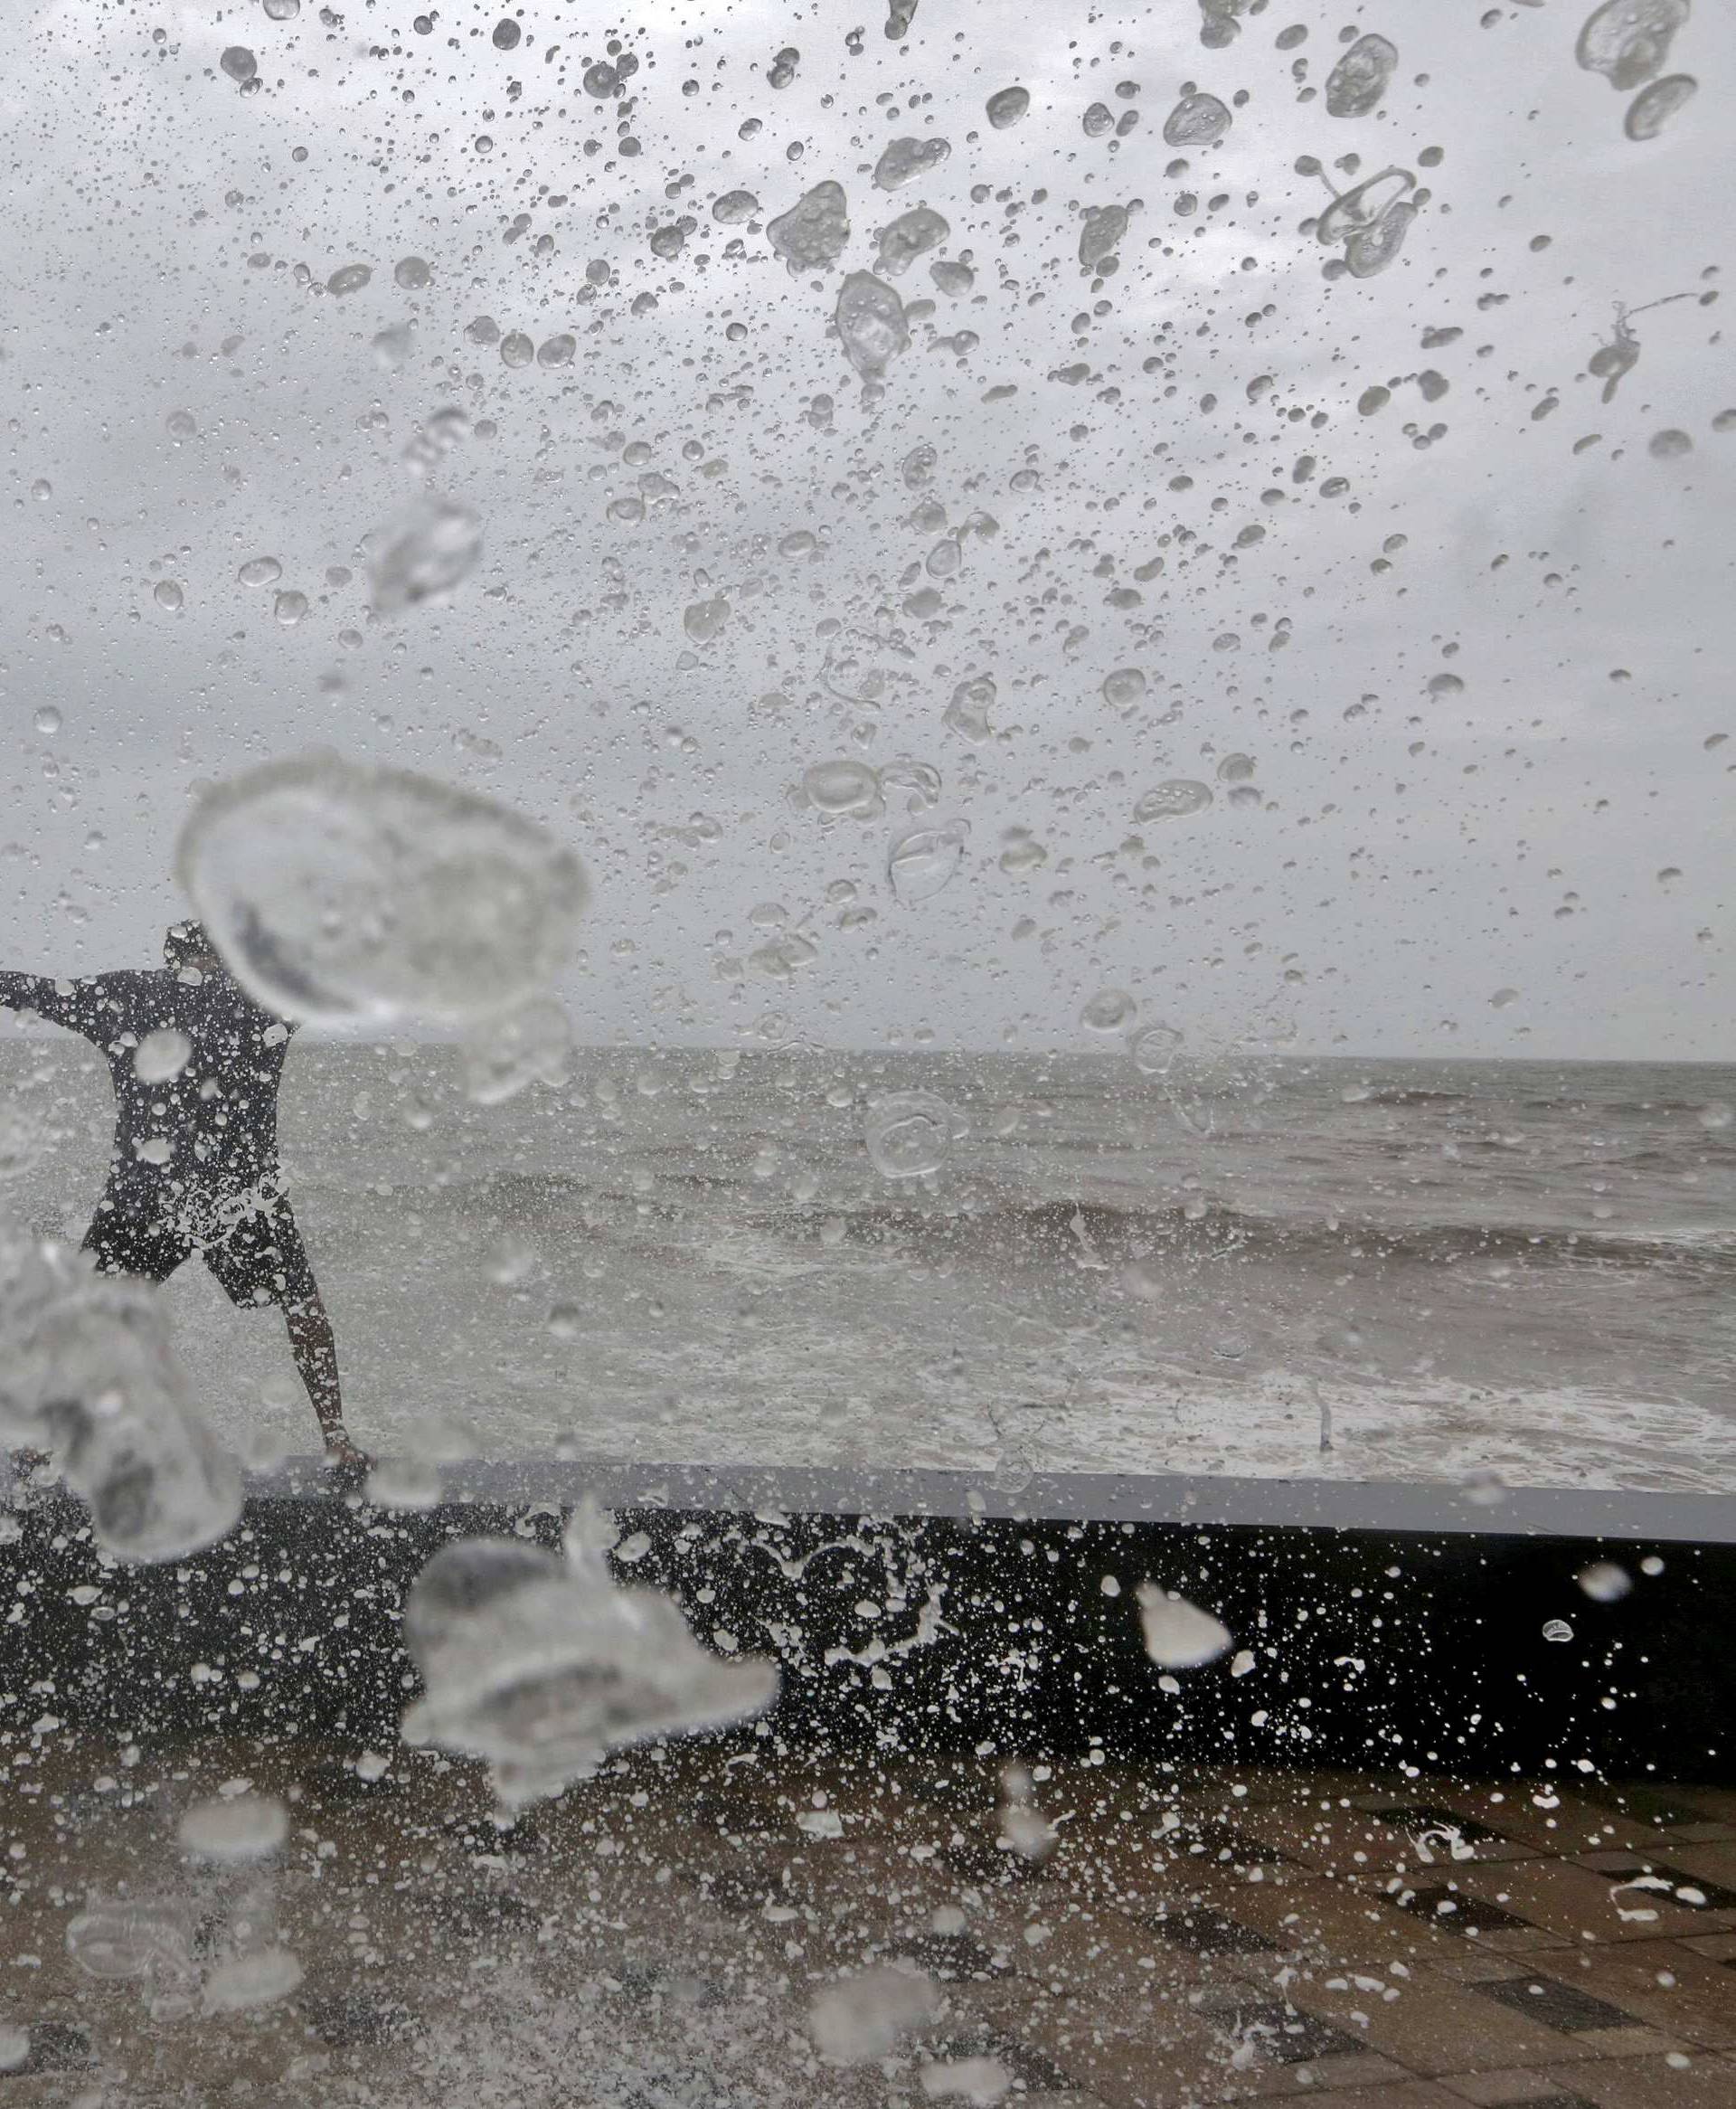 Boys get soaked by a large wave during high tide at the sea front in Mumbai